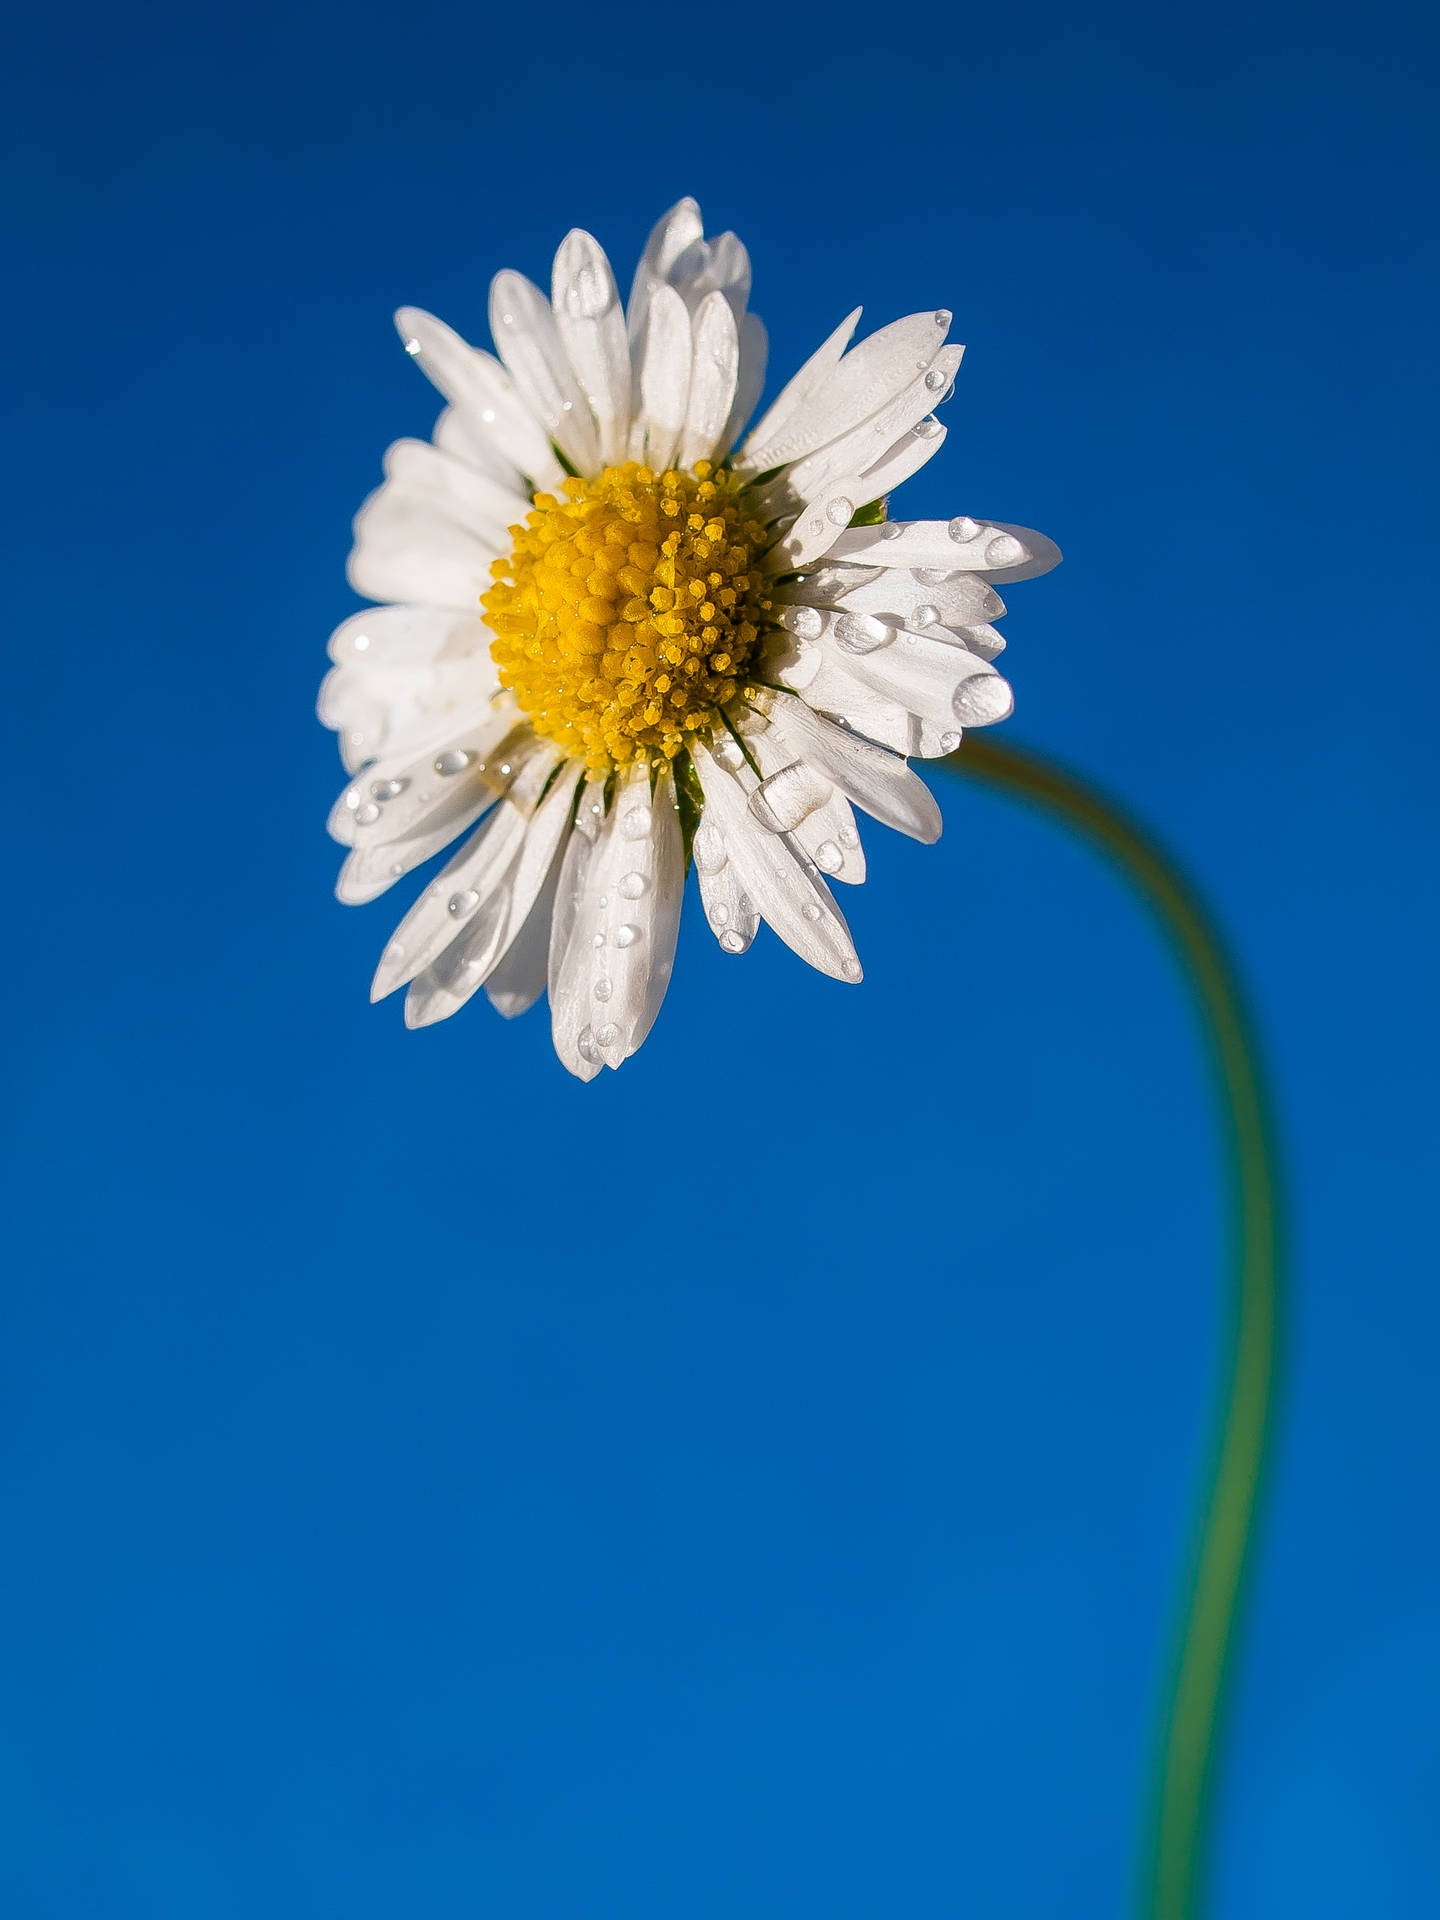 Daisy 2736X3648 Wallpaper and Background Image